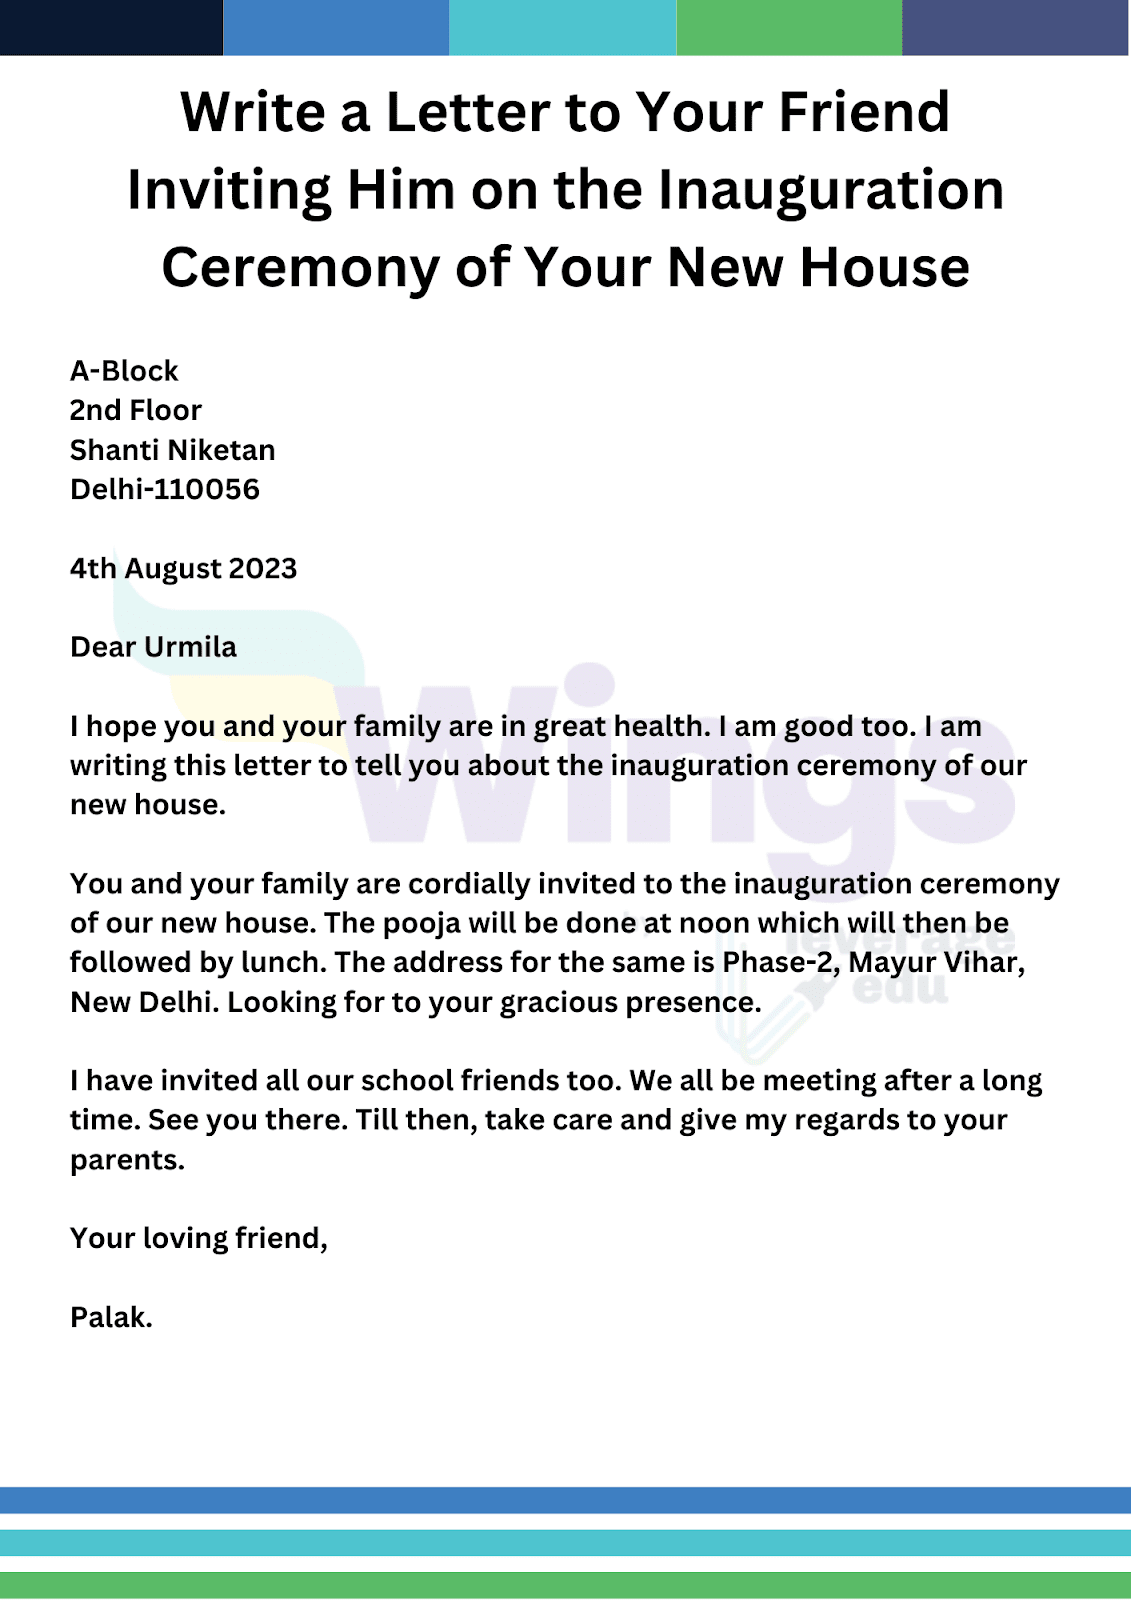 Write a Letter to Your Friend Inviting Him on the Inauguration Ceremony of Your New House     